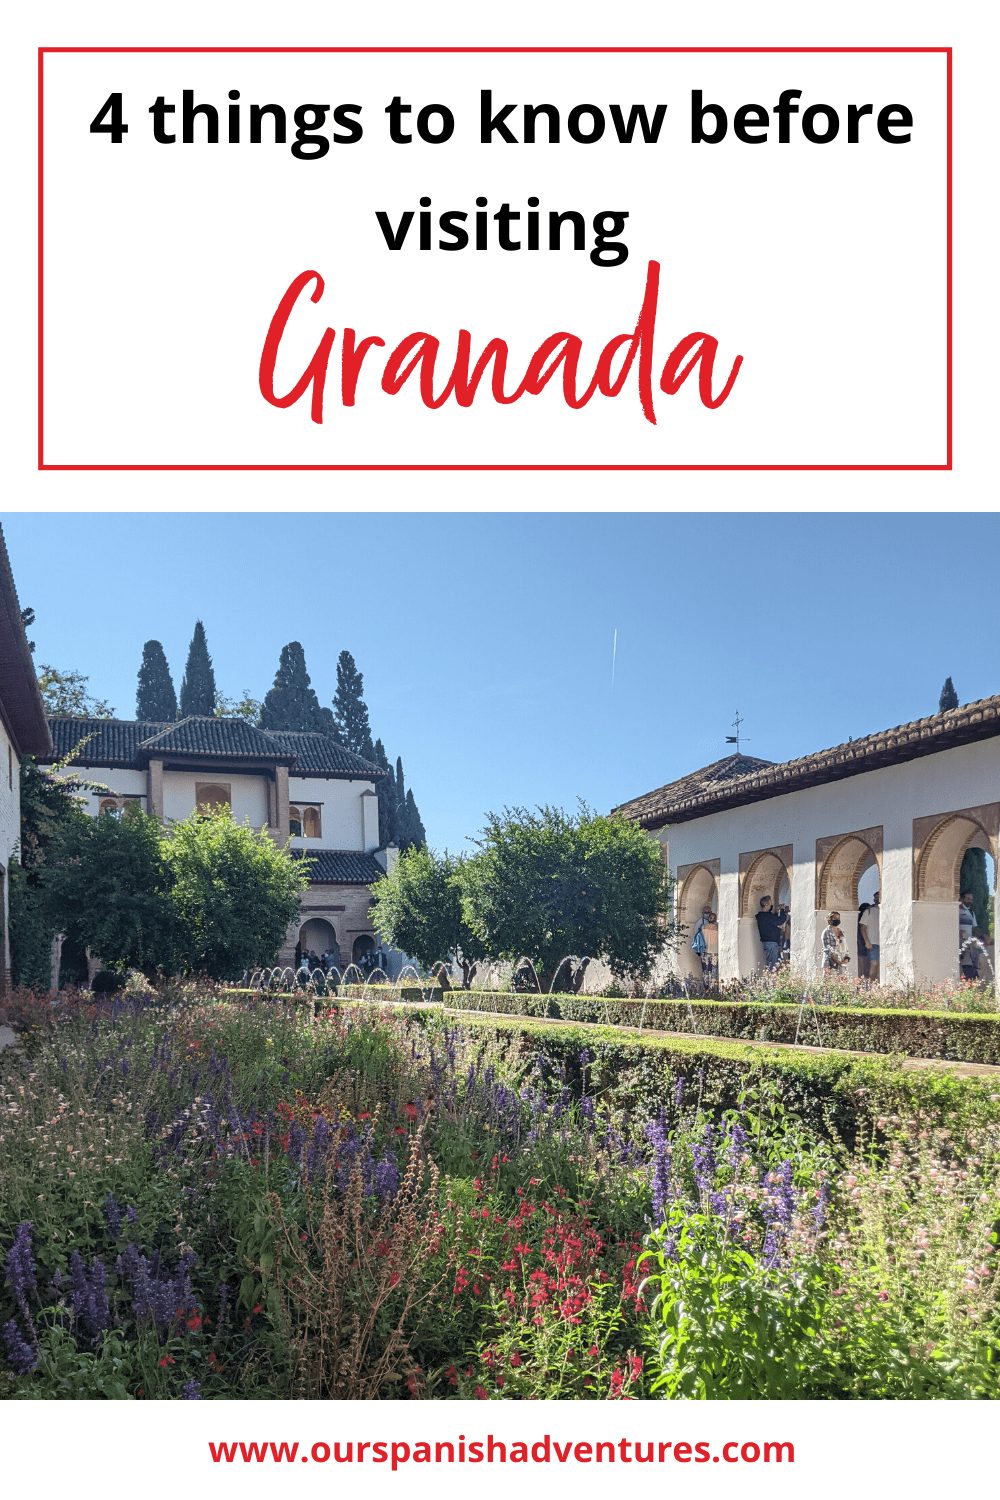 4 things to know before visiting Granada | Our Spanish Adventures